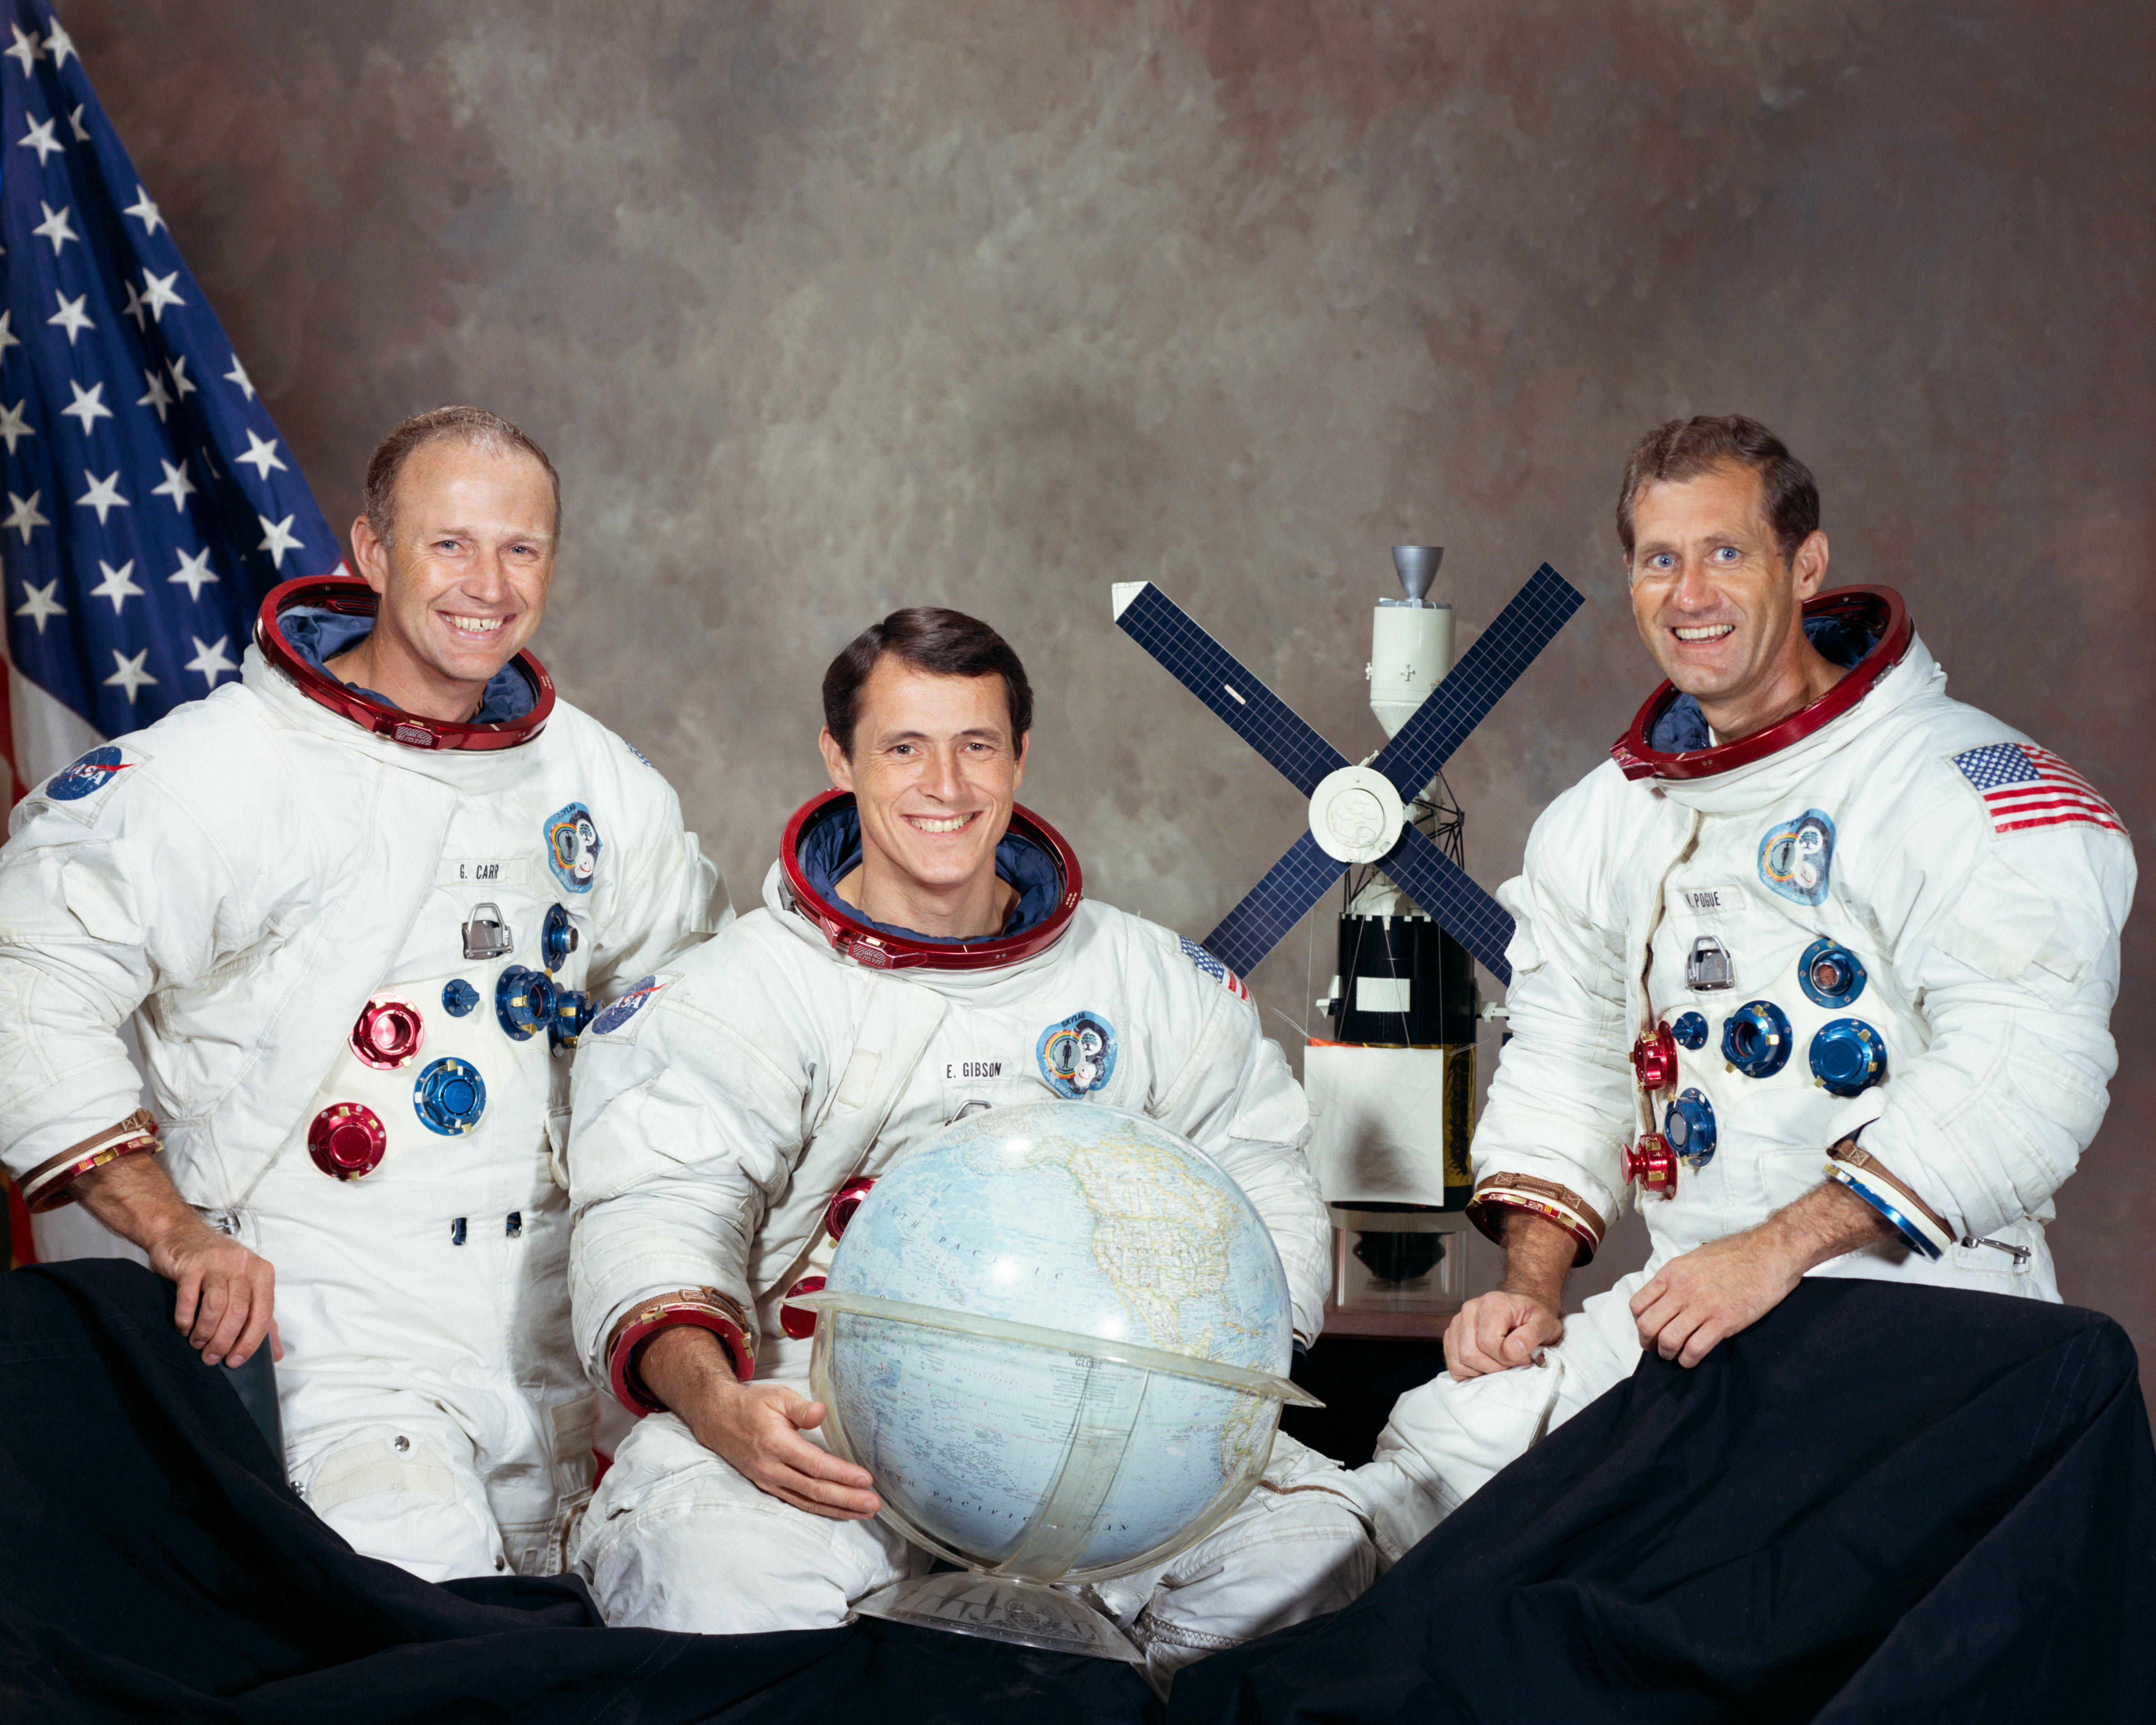 Breaking News Picture of the Skylab 4 crew of Gerald P. Carr, Edward G. Gibson, and William R. Pogue